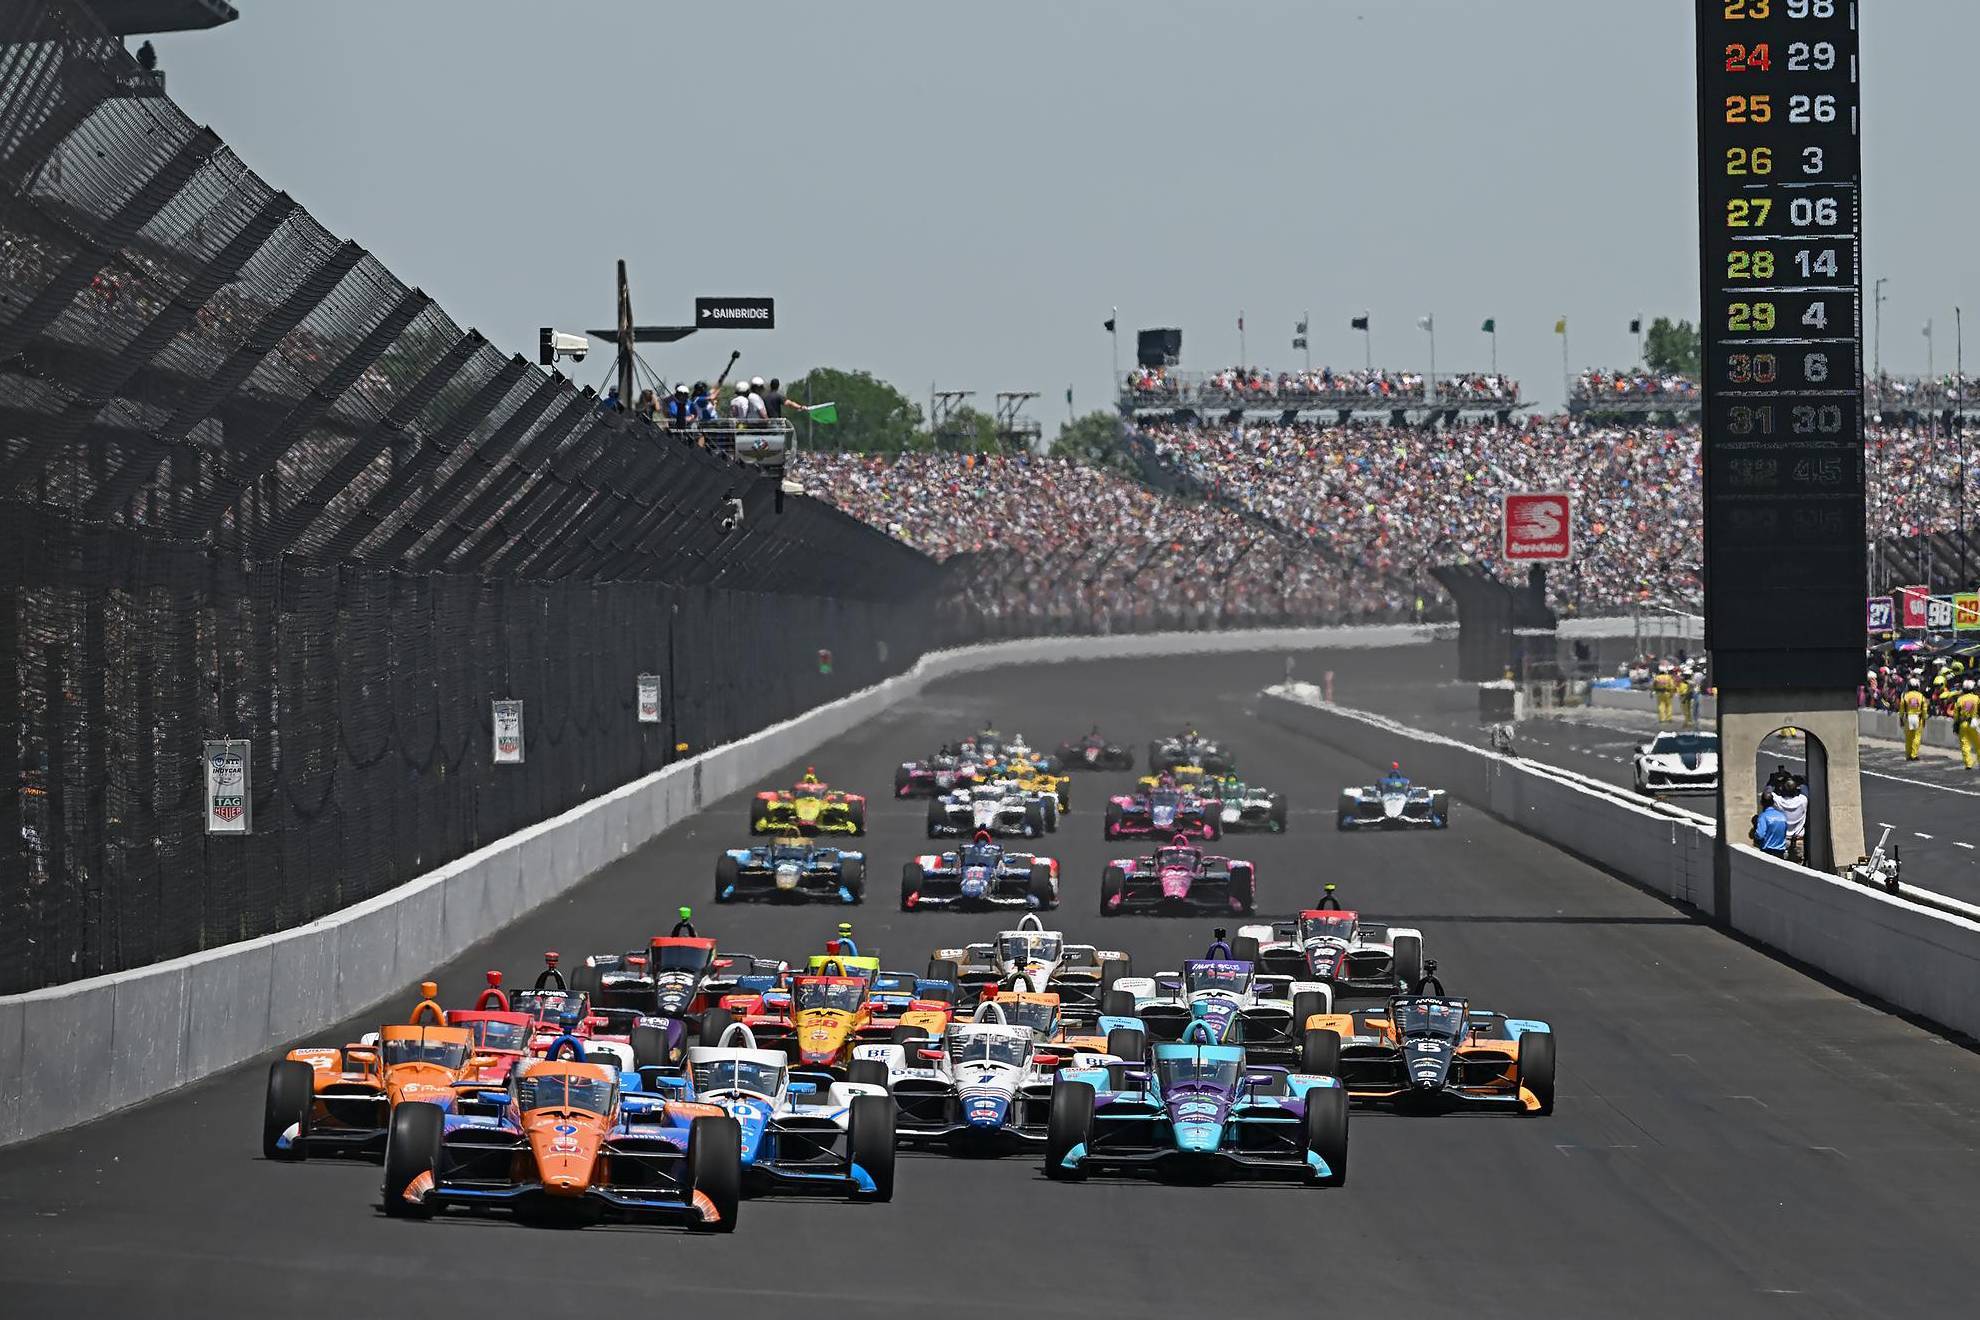 Indy 500 will no longer give out double points, as of 2023